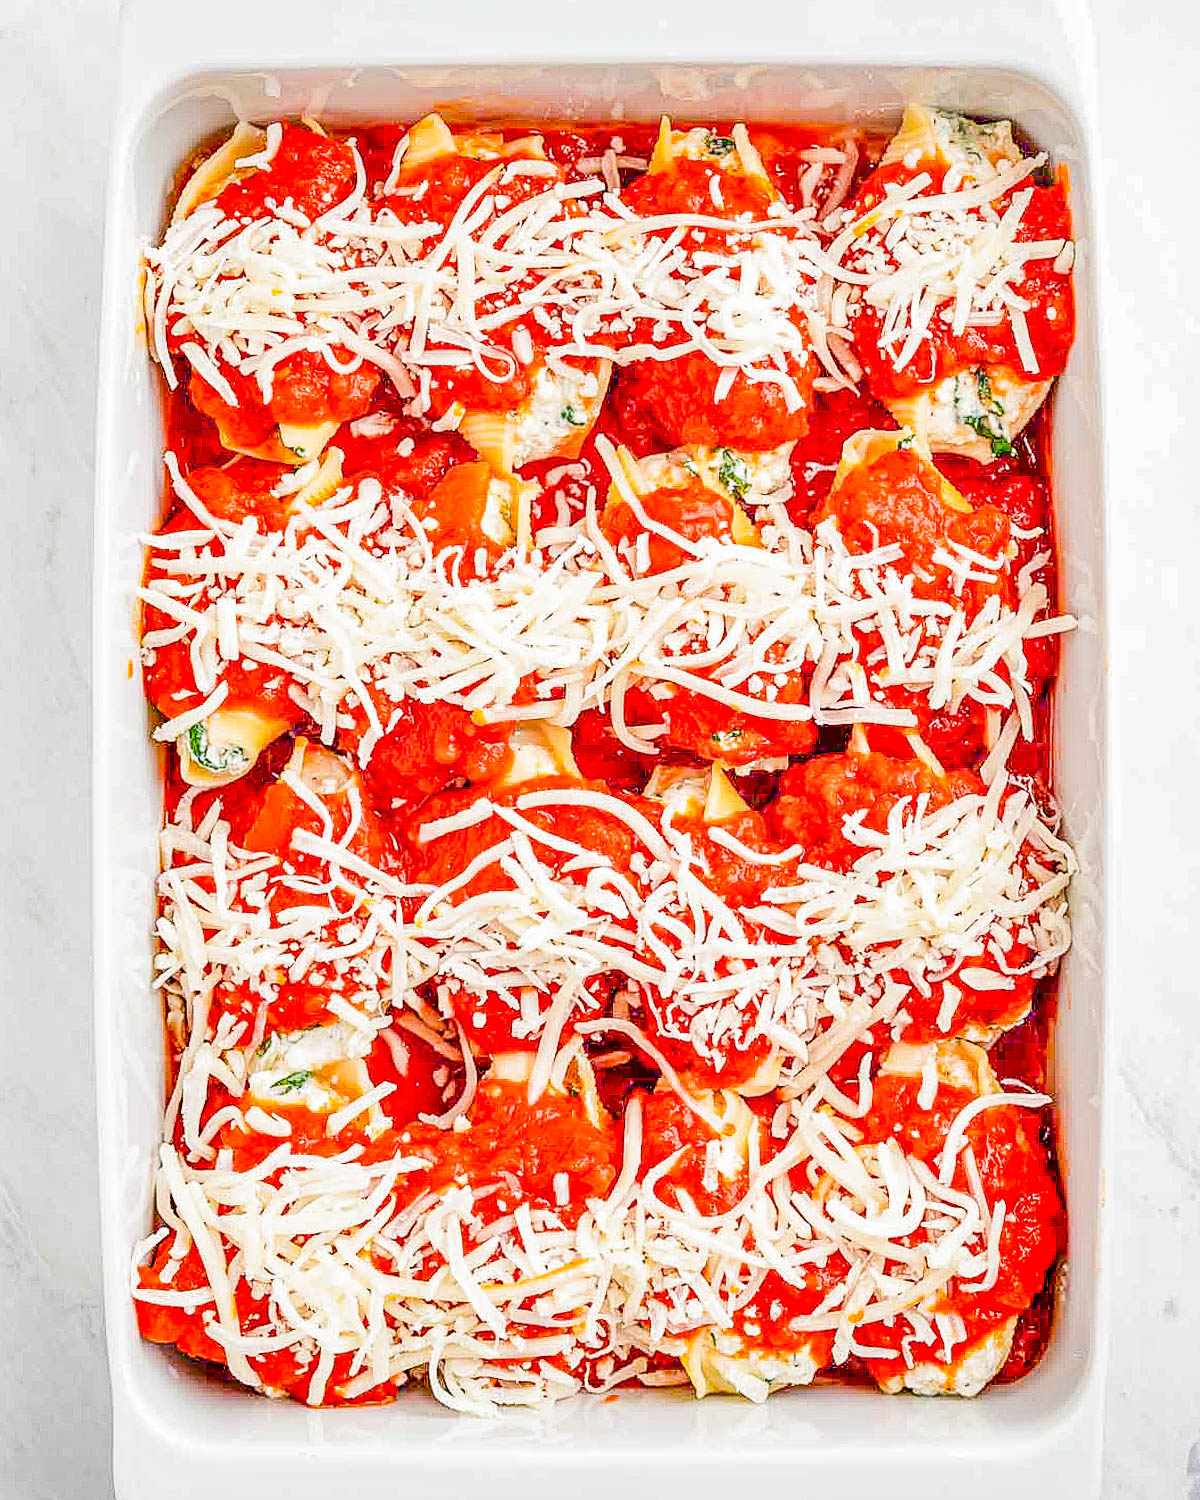 Unbaked stuffed shells in a dish, ready for the oven, topped with sauce and shredded cheese.